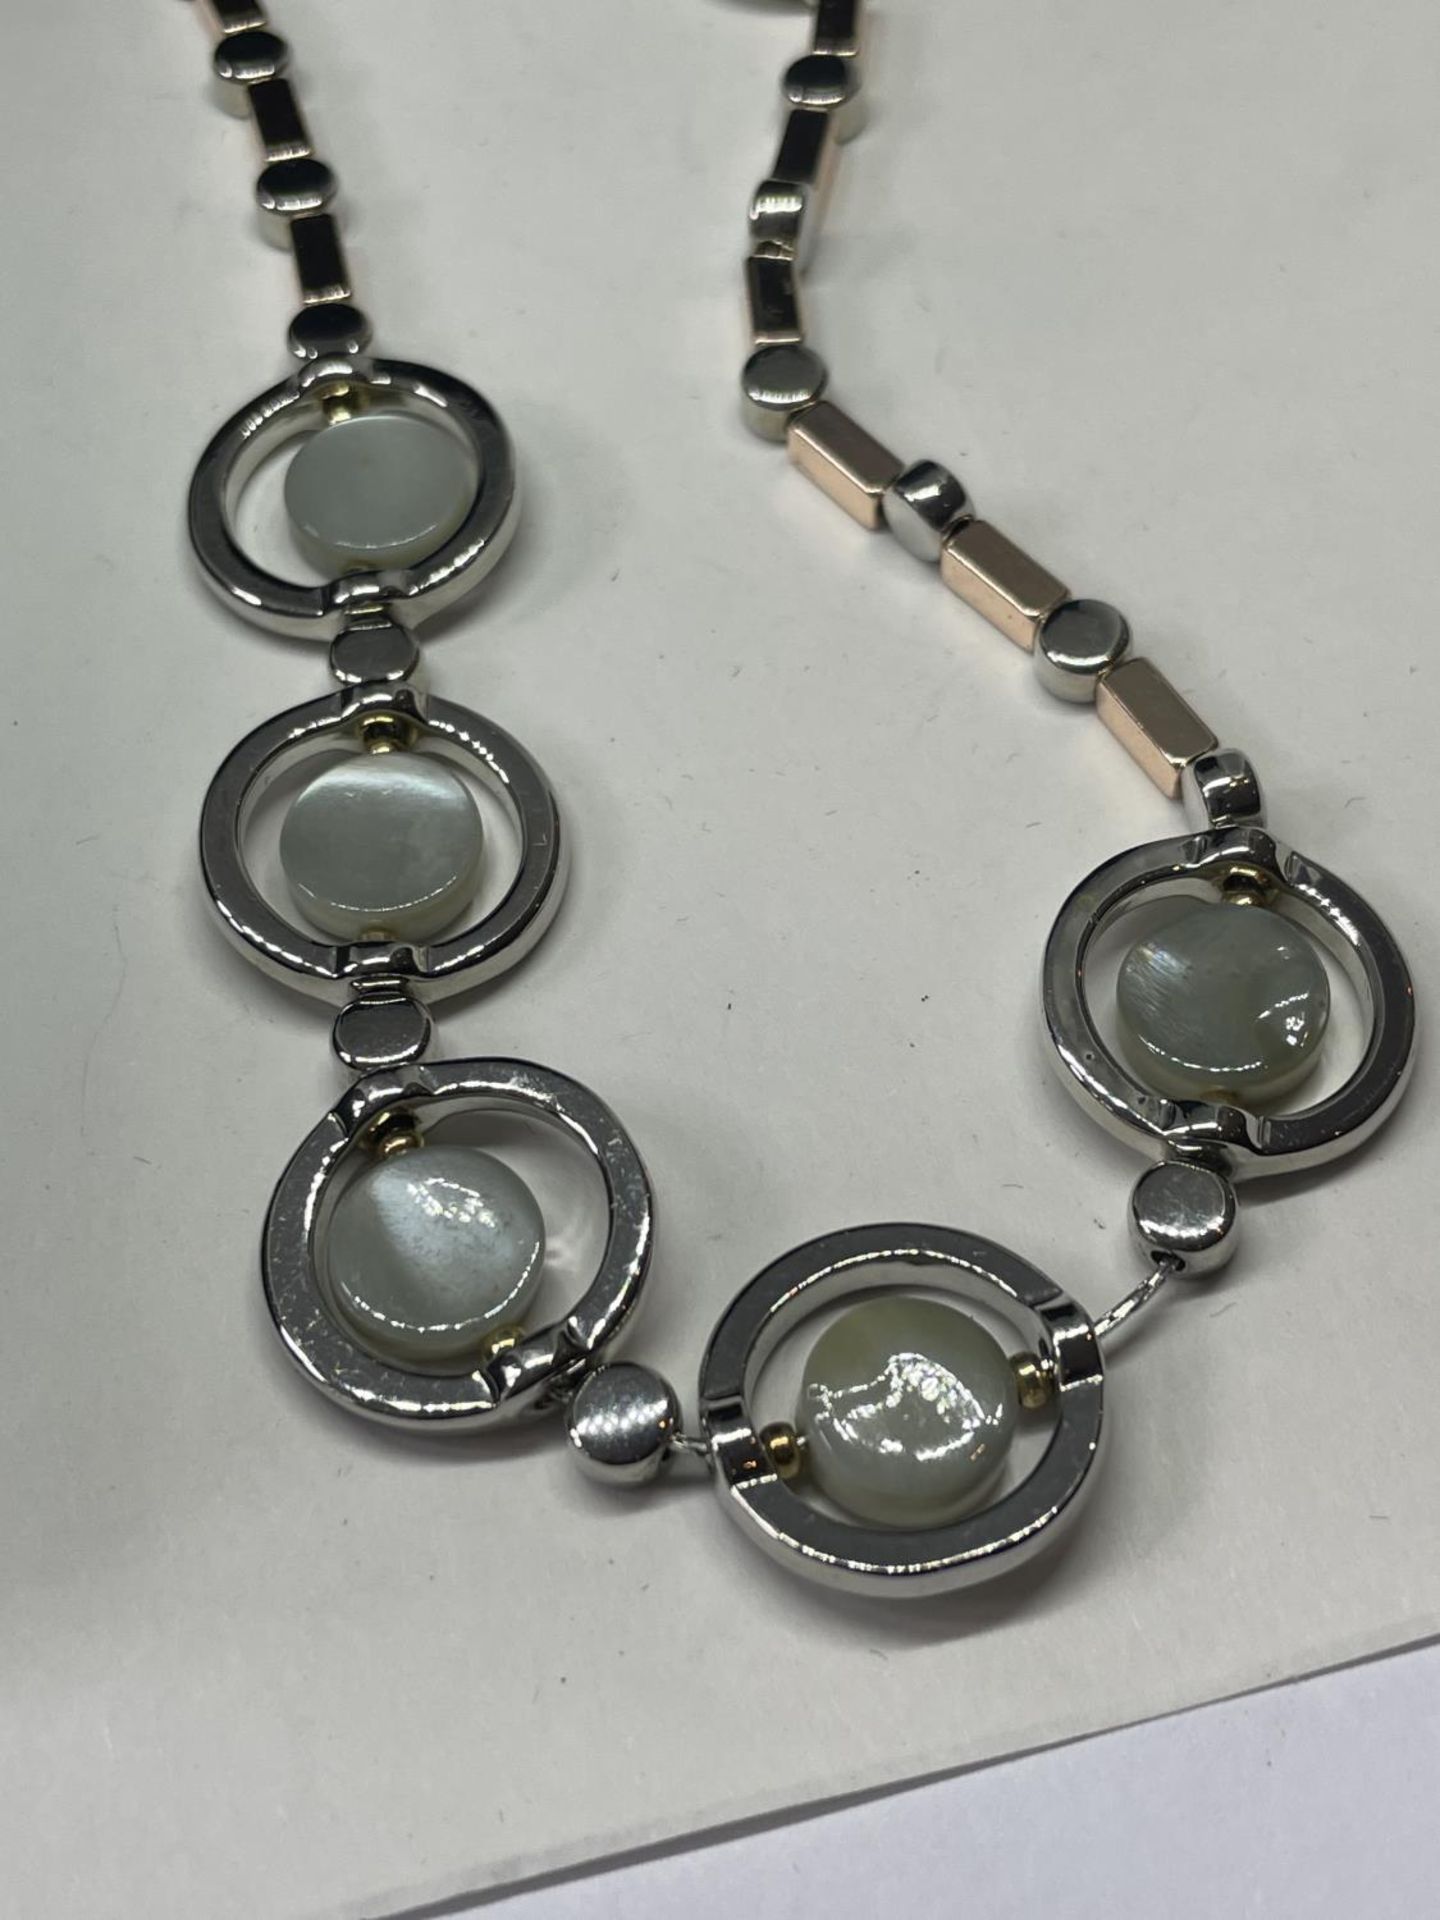 A LAURA ASHLEY NECKLACE - Image 2 of 3